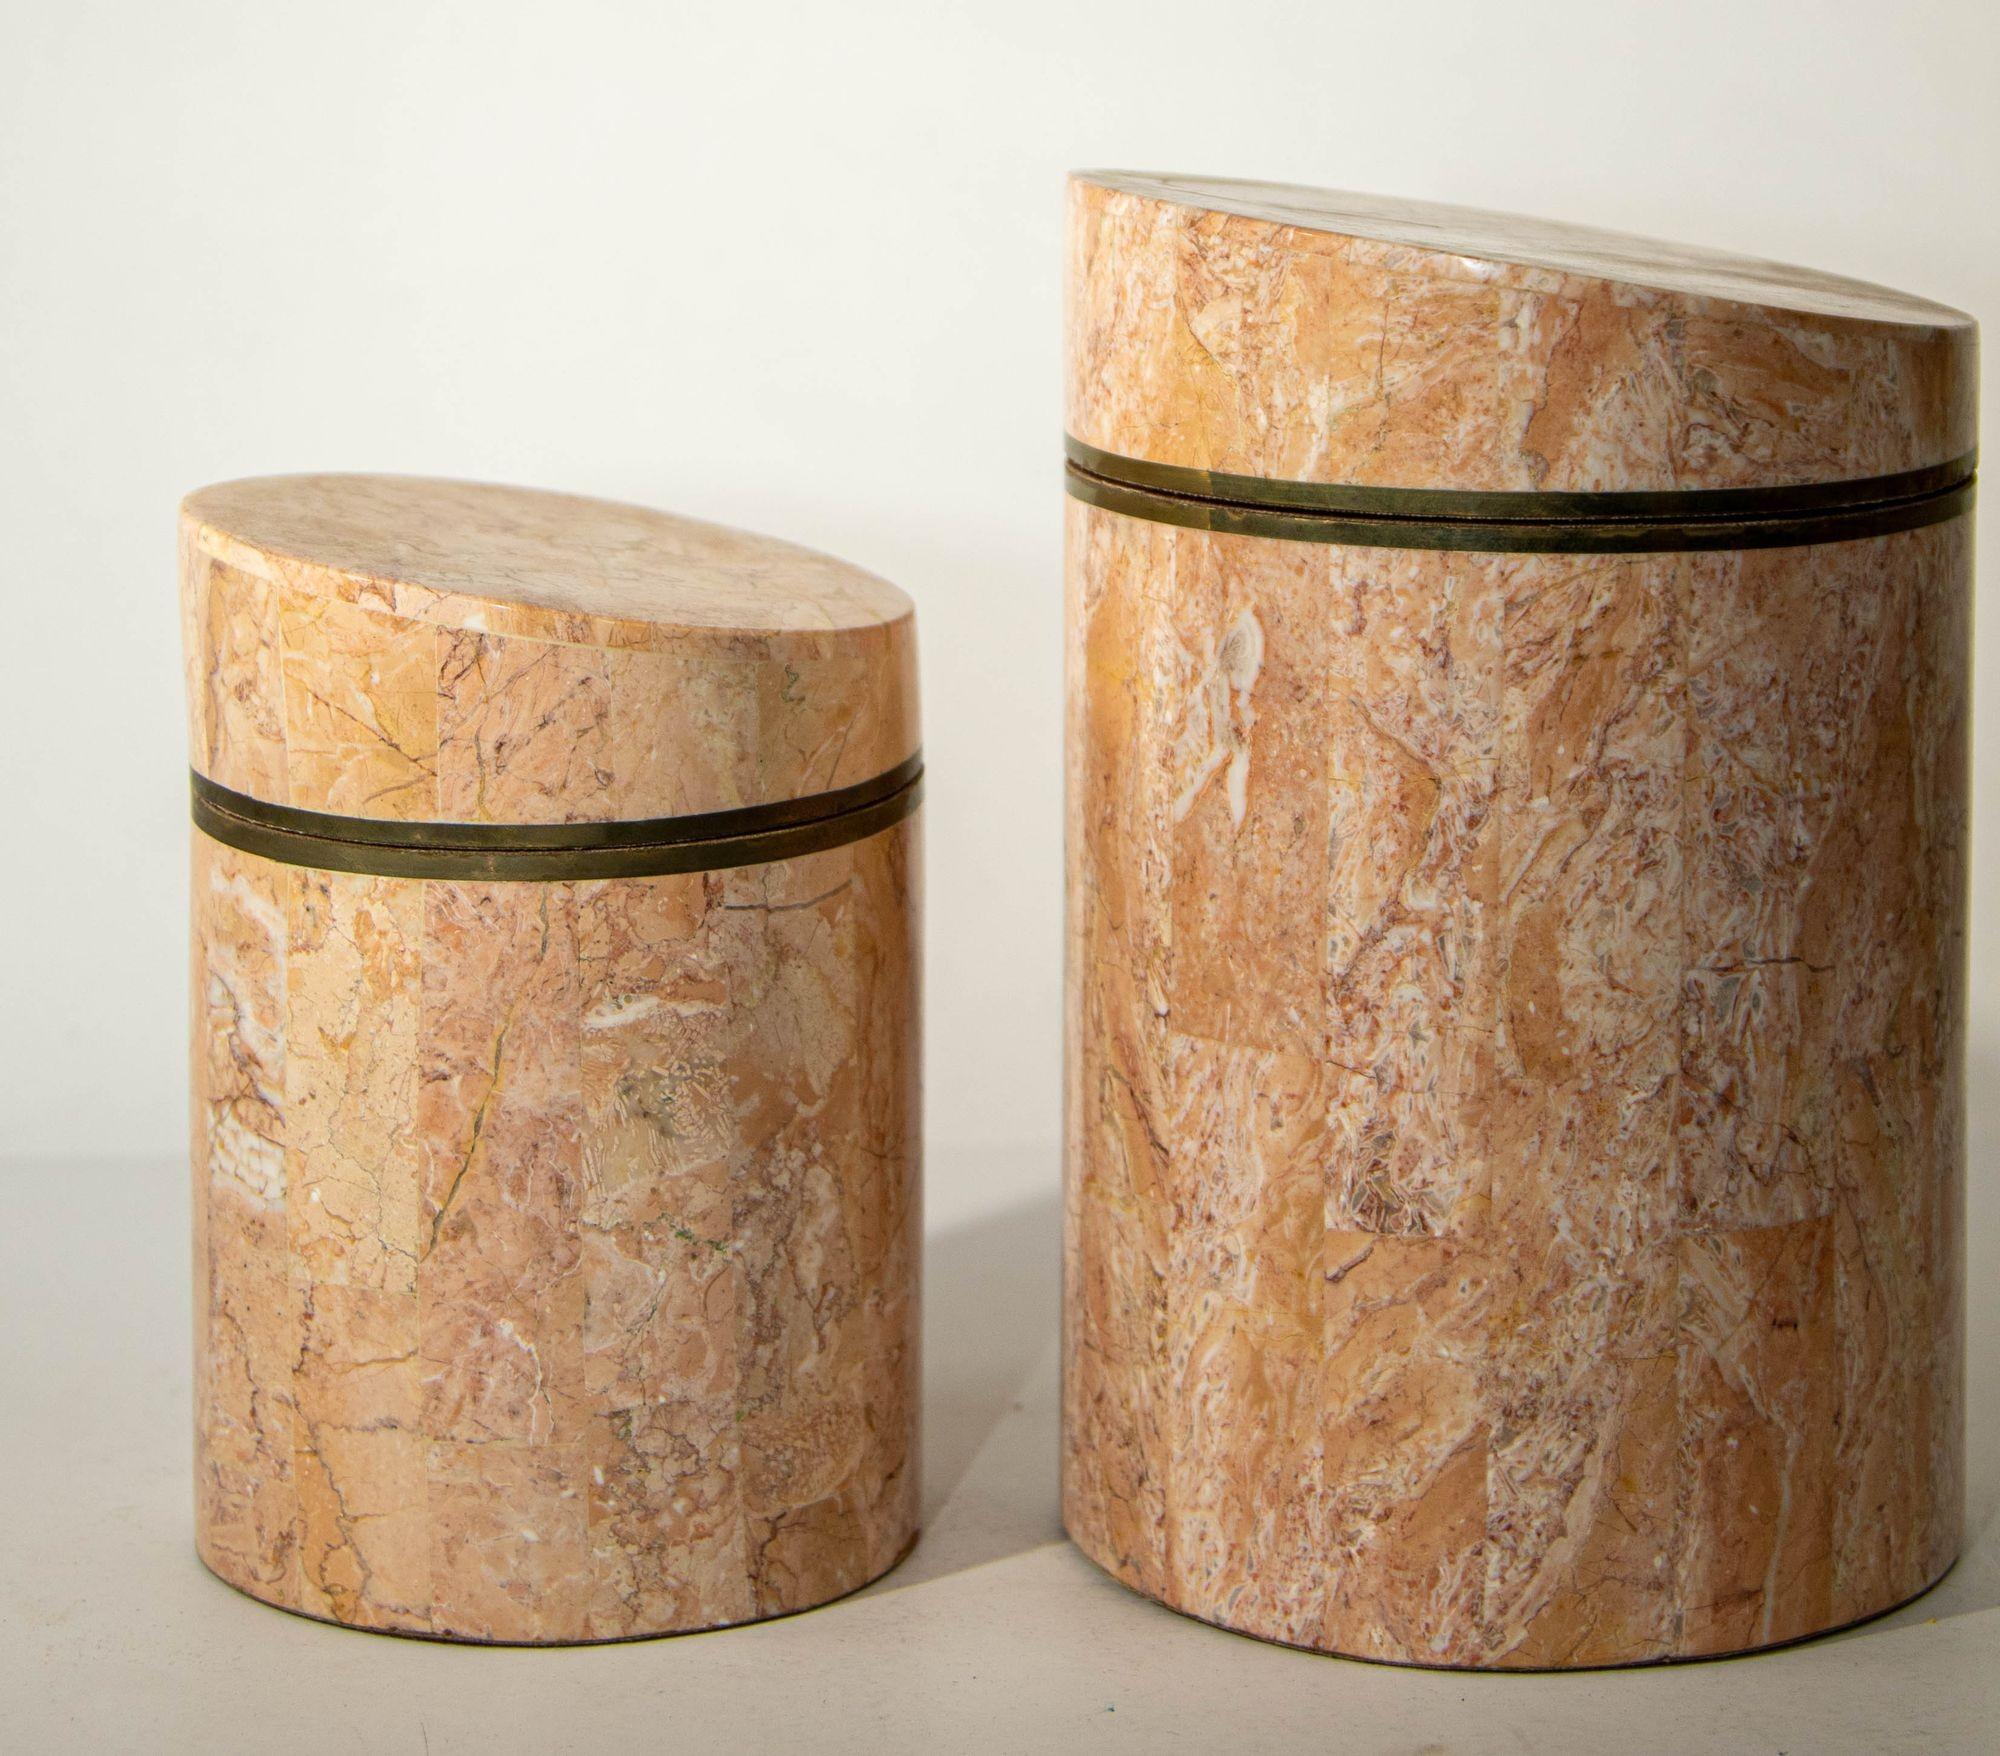 Vintage Tessellated round shape decorative lidded marble boxes by Maitland Smith Set of Two.
Dimensions: Shorter: 4